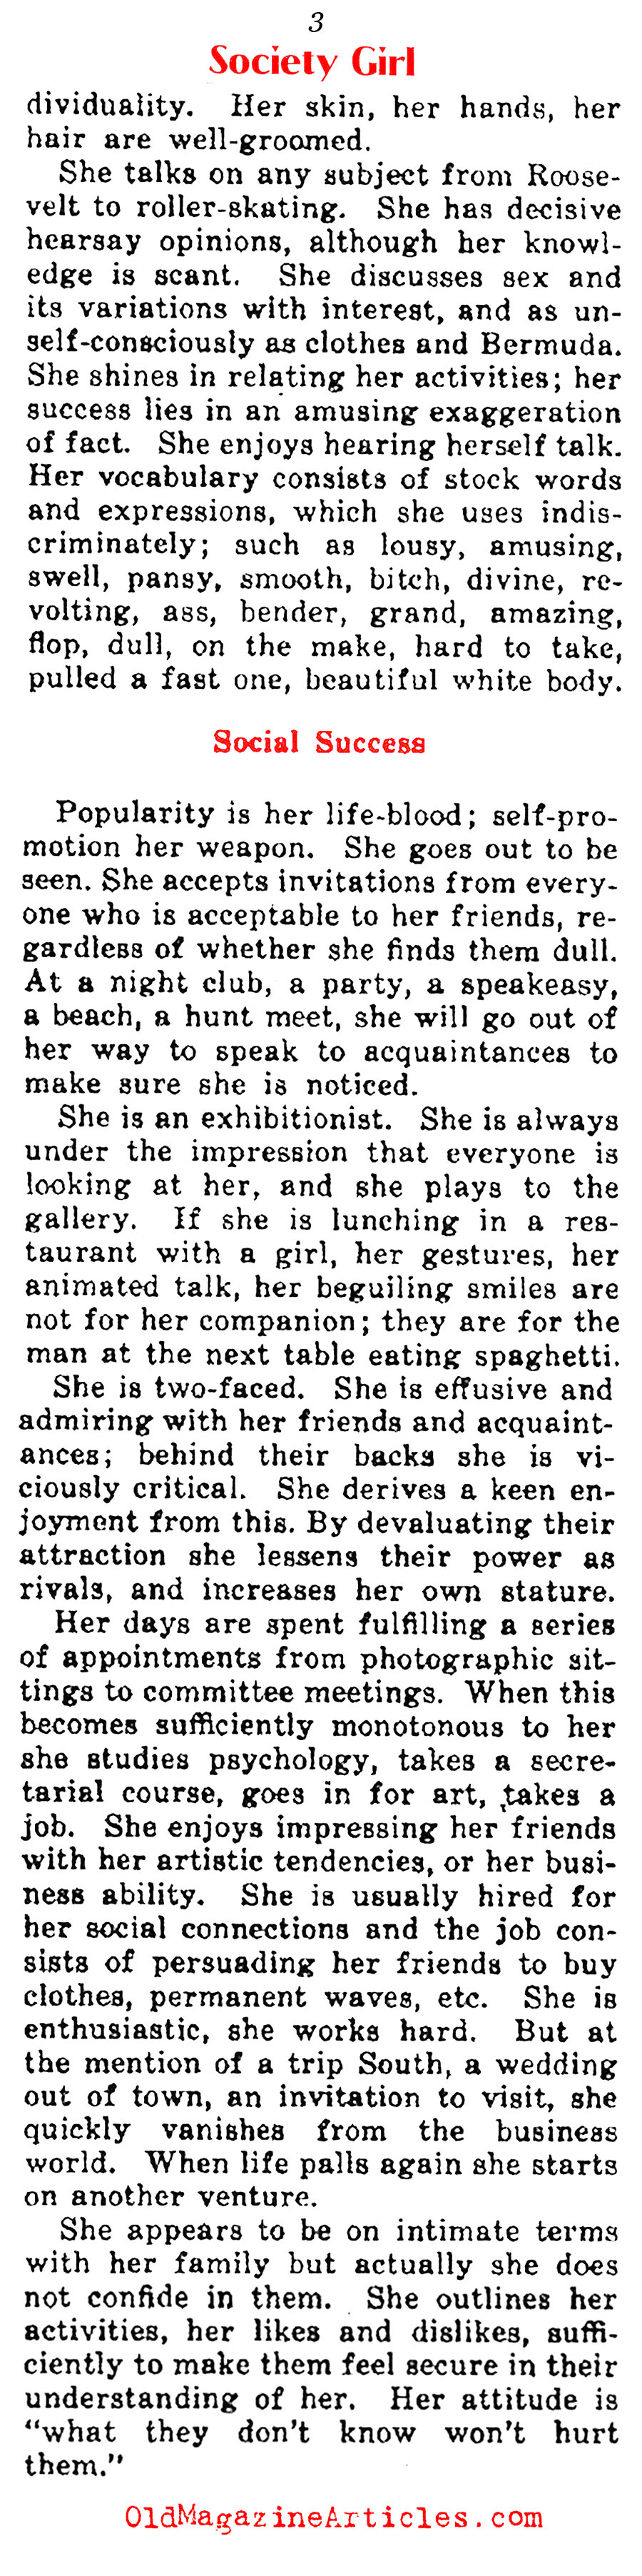 The Down-Hill Side of Being a Society Girl  (Collier's Magazine, 1933)